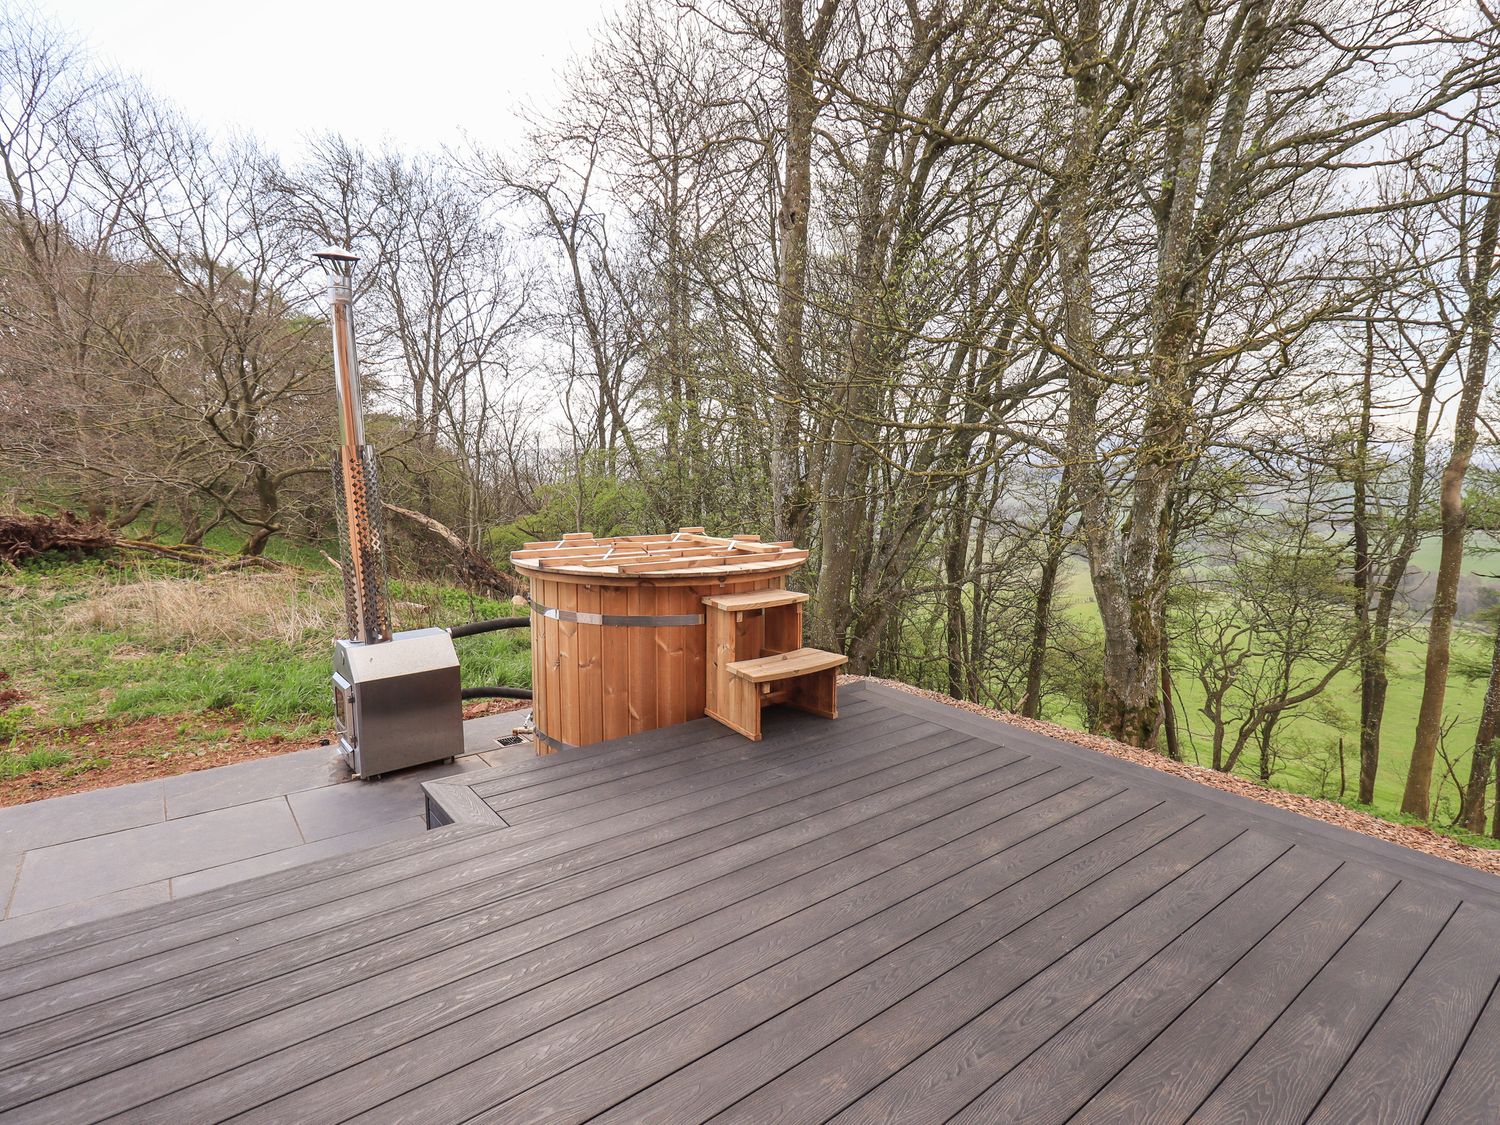 Yew Tree Cabin in Ullswater, Cumbria. In a National Park, hot tub, romantic, countryside views, pet.